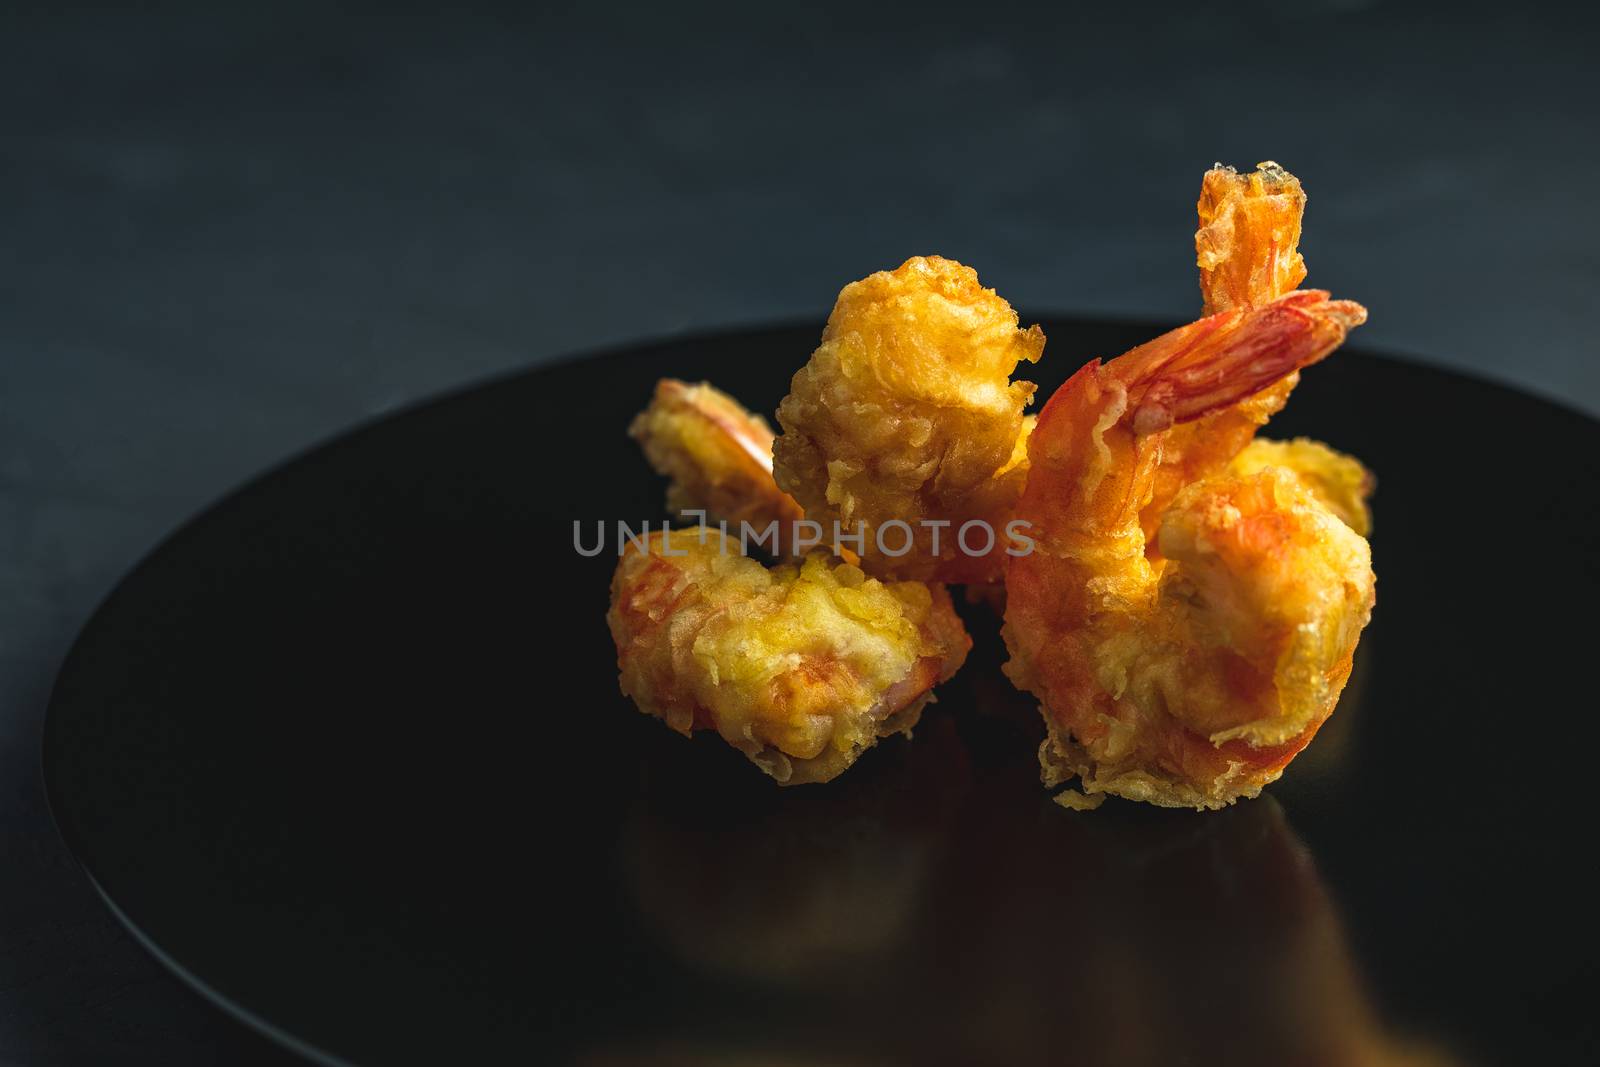 Fried Shrimps tempura in black plate on dark concrete surface background. Copy space for you text. Seafood tempura dish served japanese or eastern Asia style with chopsticks.